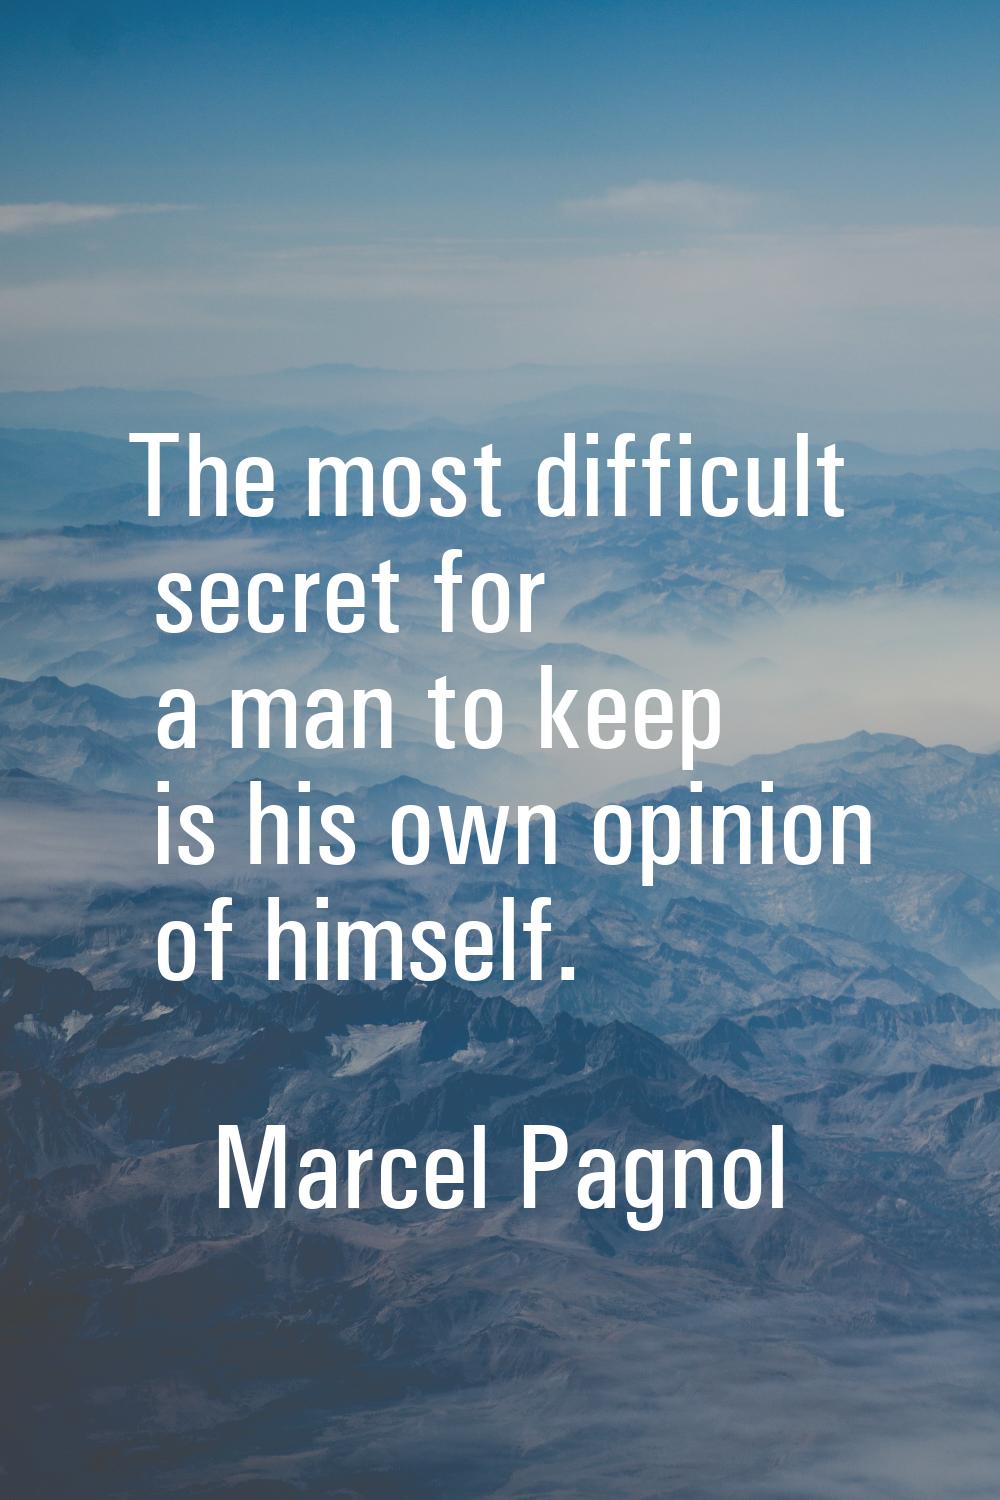 The most difficult secret for a man to keep is his own opinion of himself.